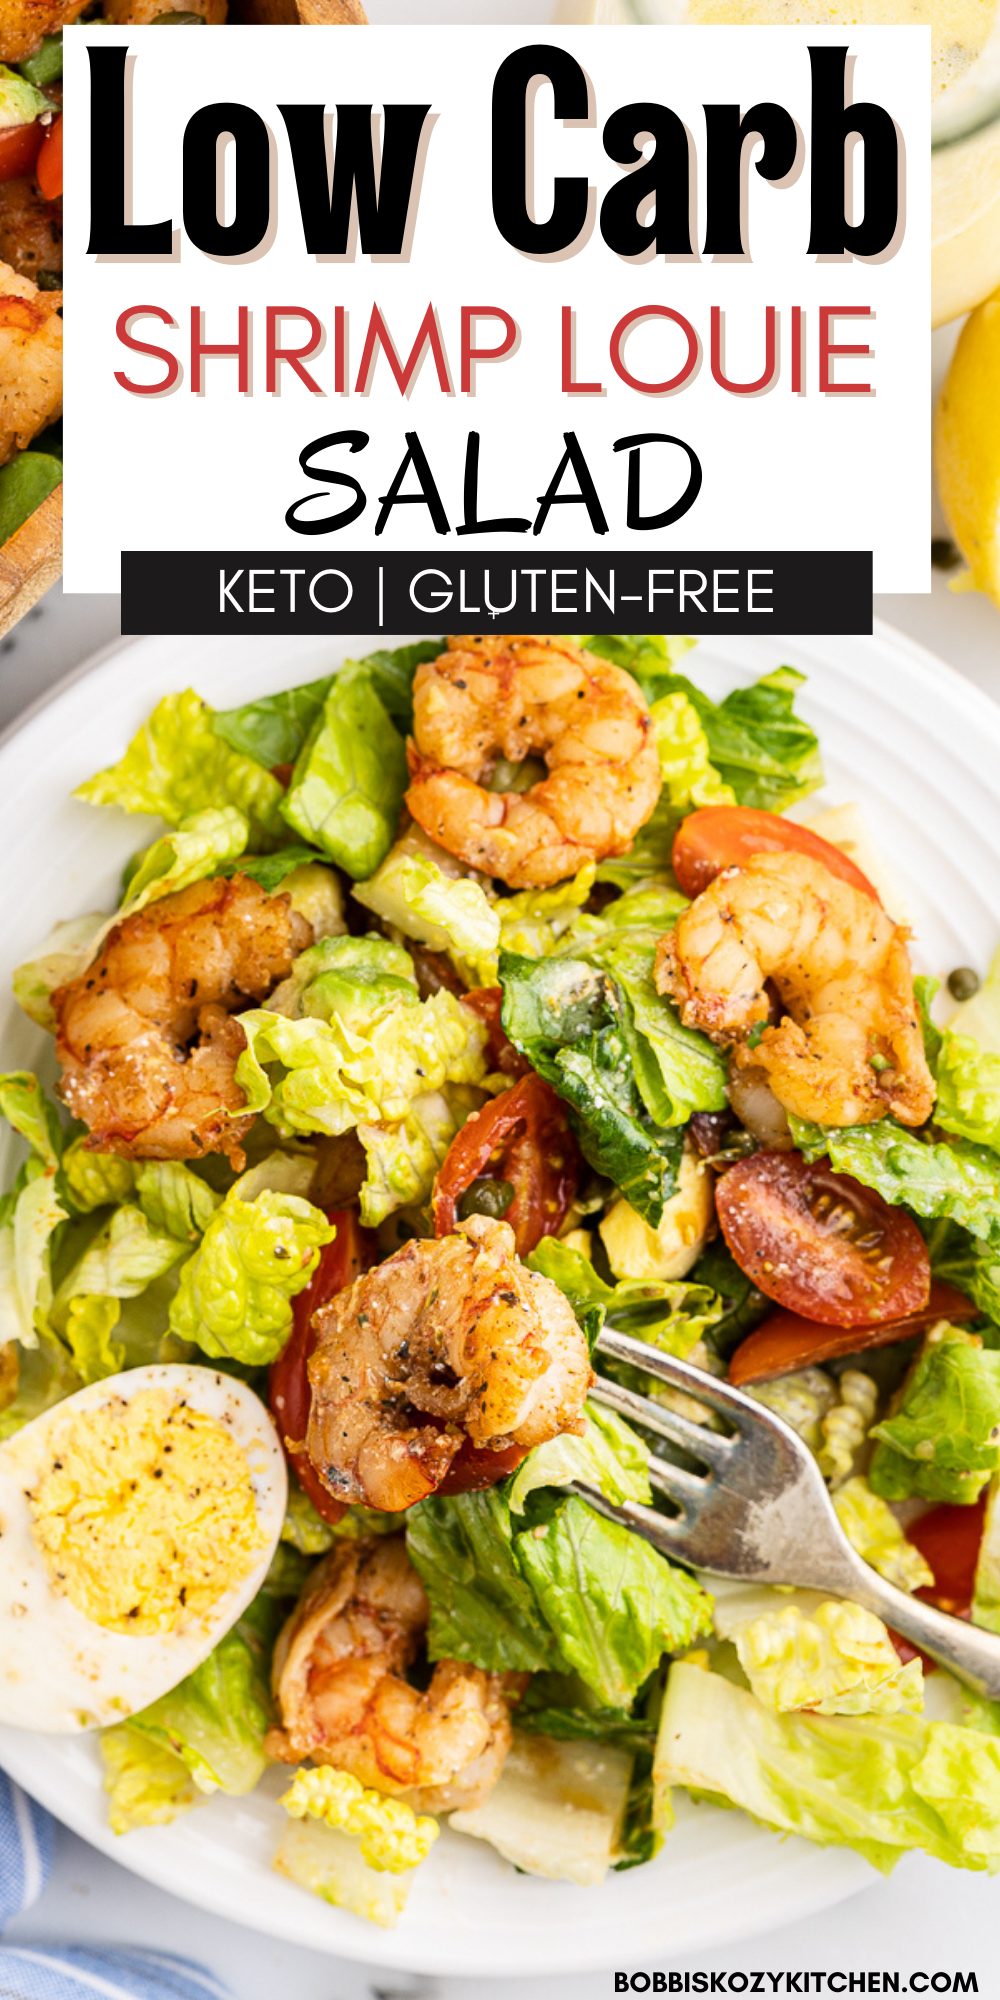 Pinterest graphic with the image of low carb shrimp Louie salad on it.